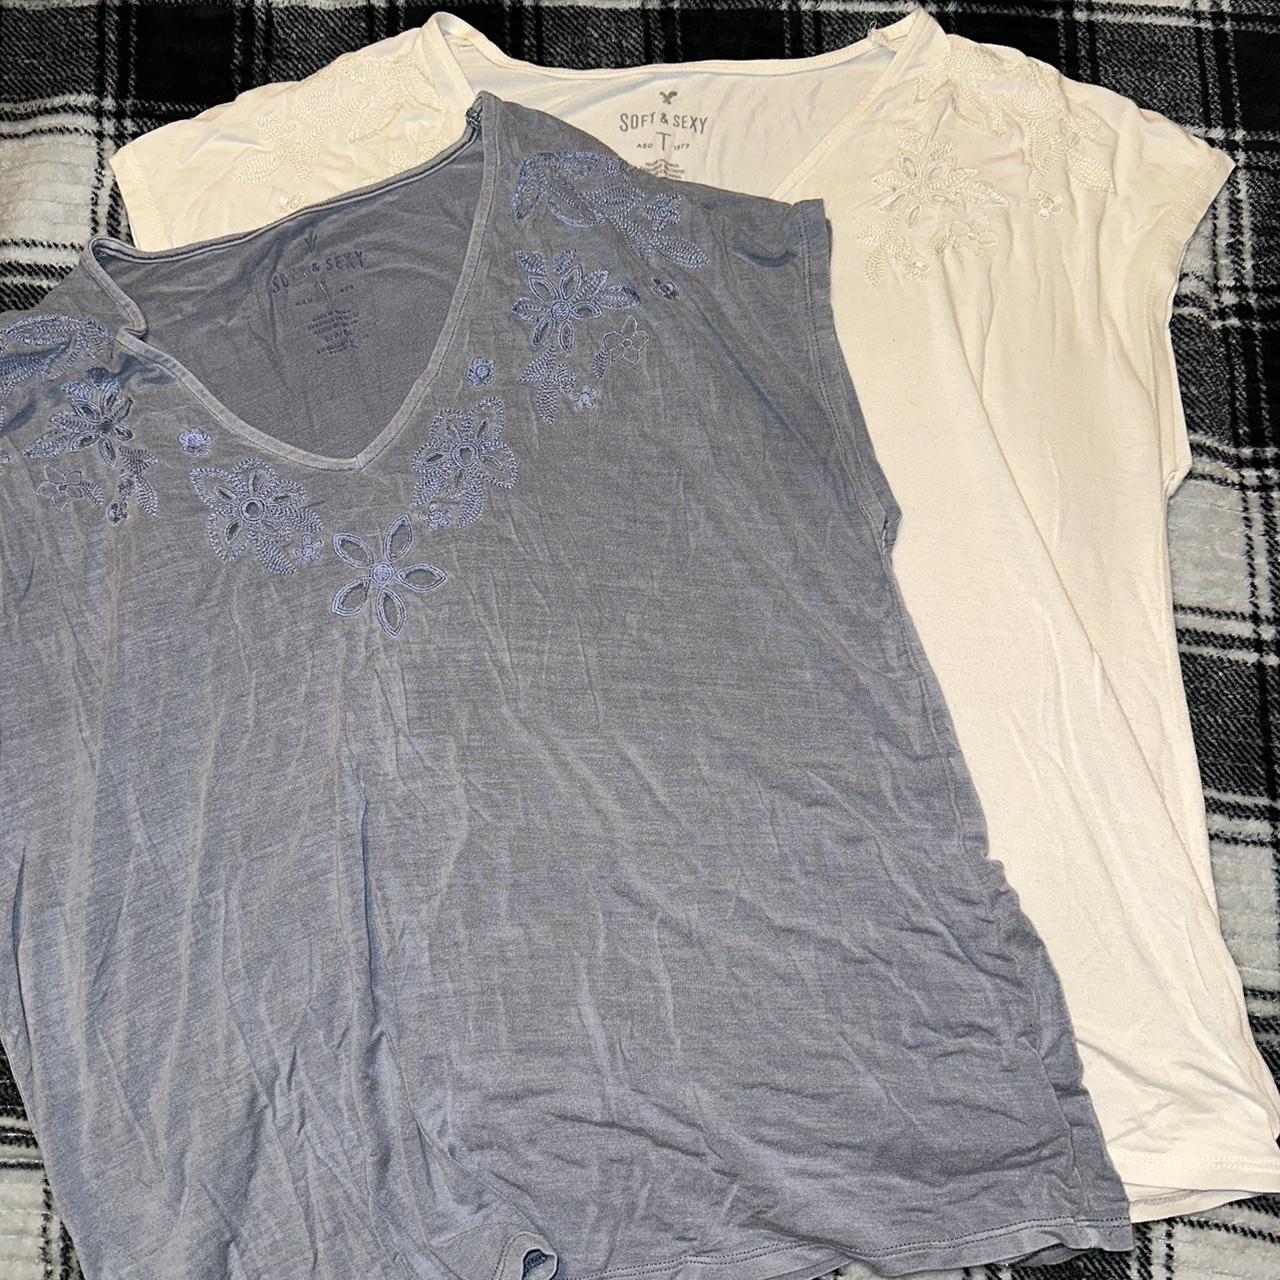 American Eagle Outfitters Women's Blue and Grey T-shirt (5)